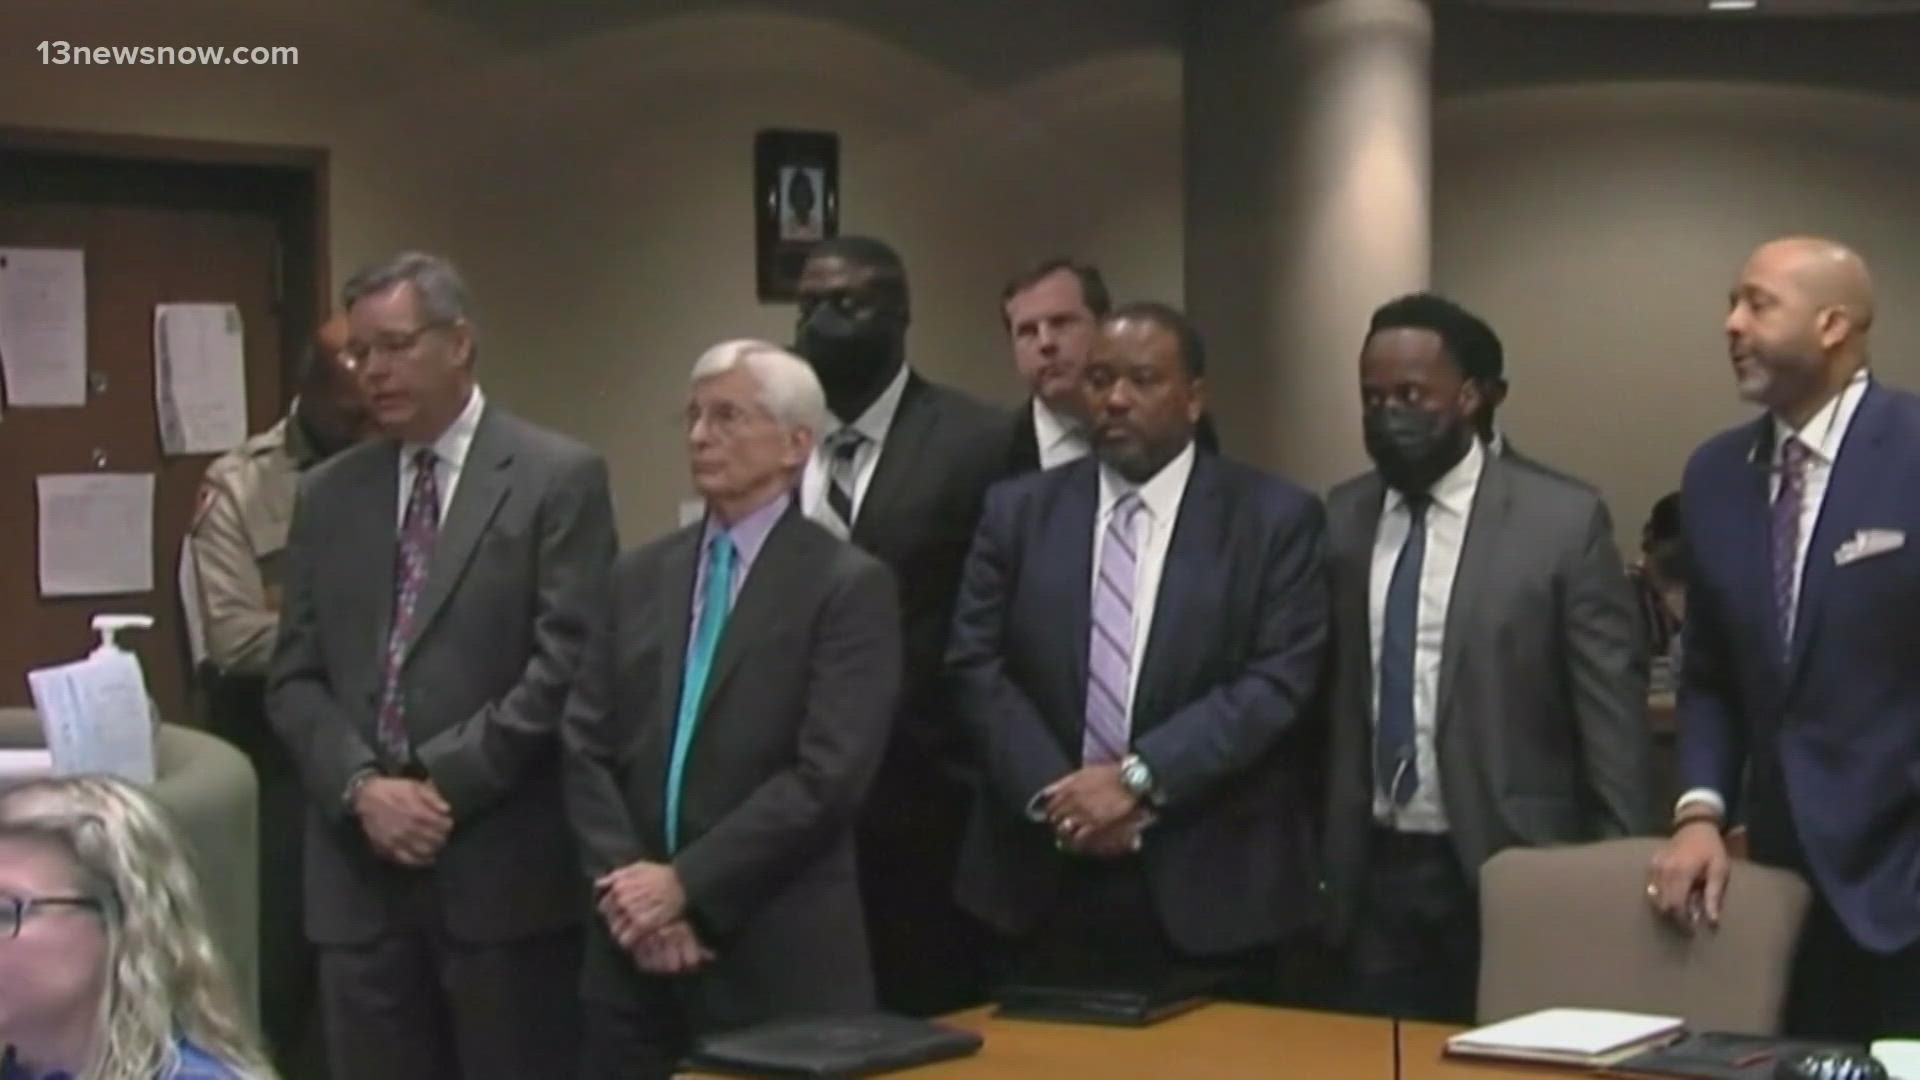 The five former Memphis police officers charged in the death of Tyre Nichols made their first court appearances.